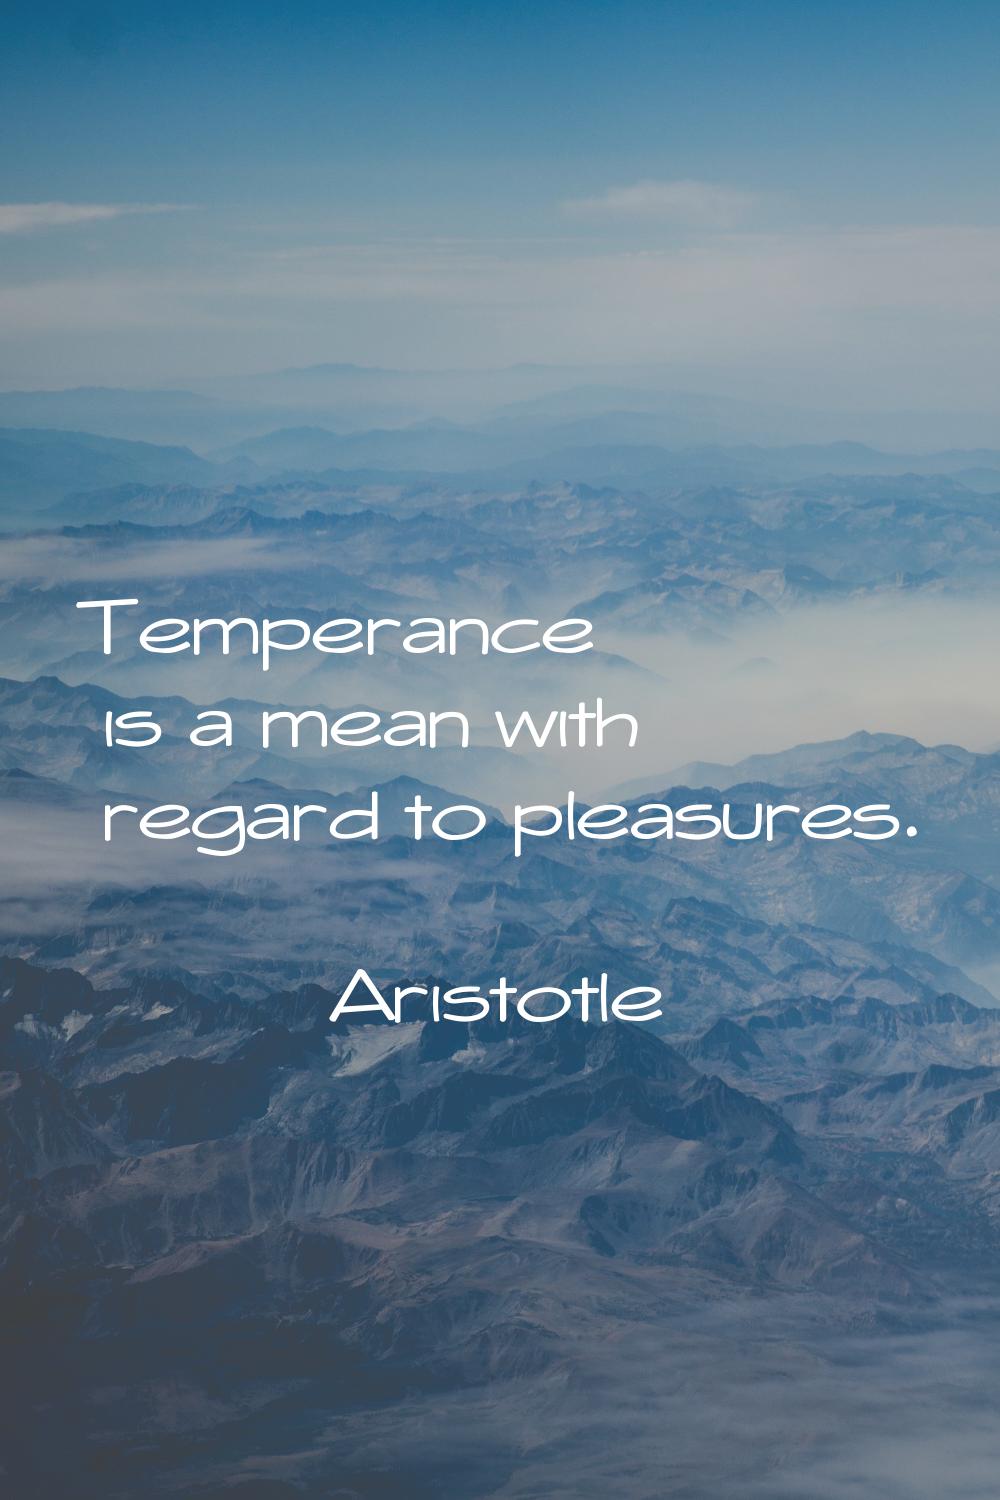 Temperance is a mean with regard to pleasures.